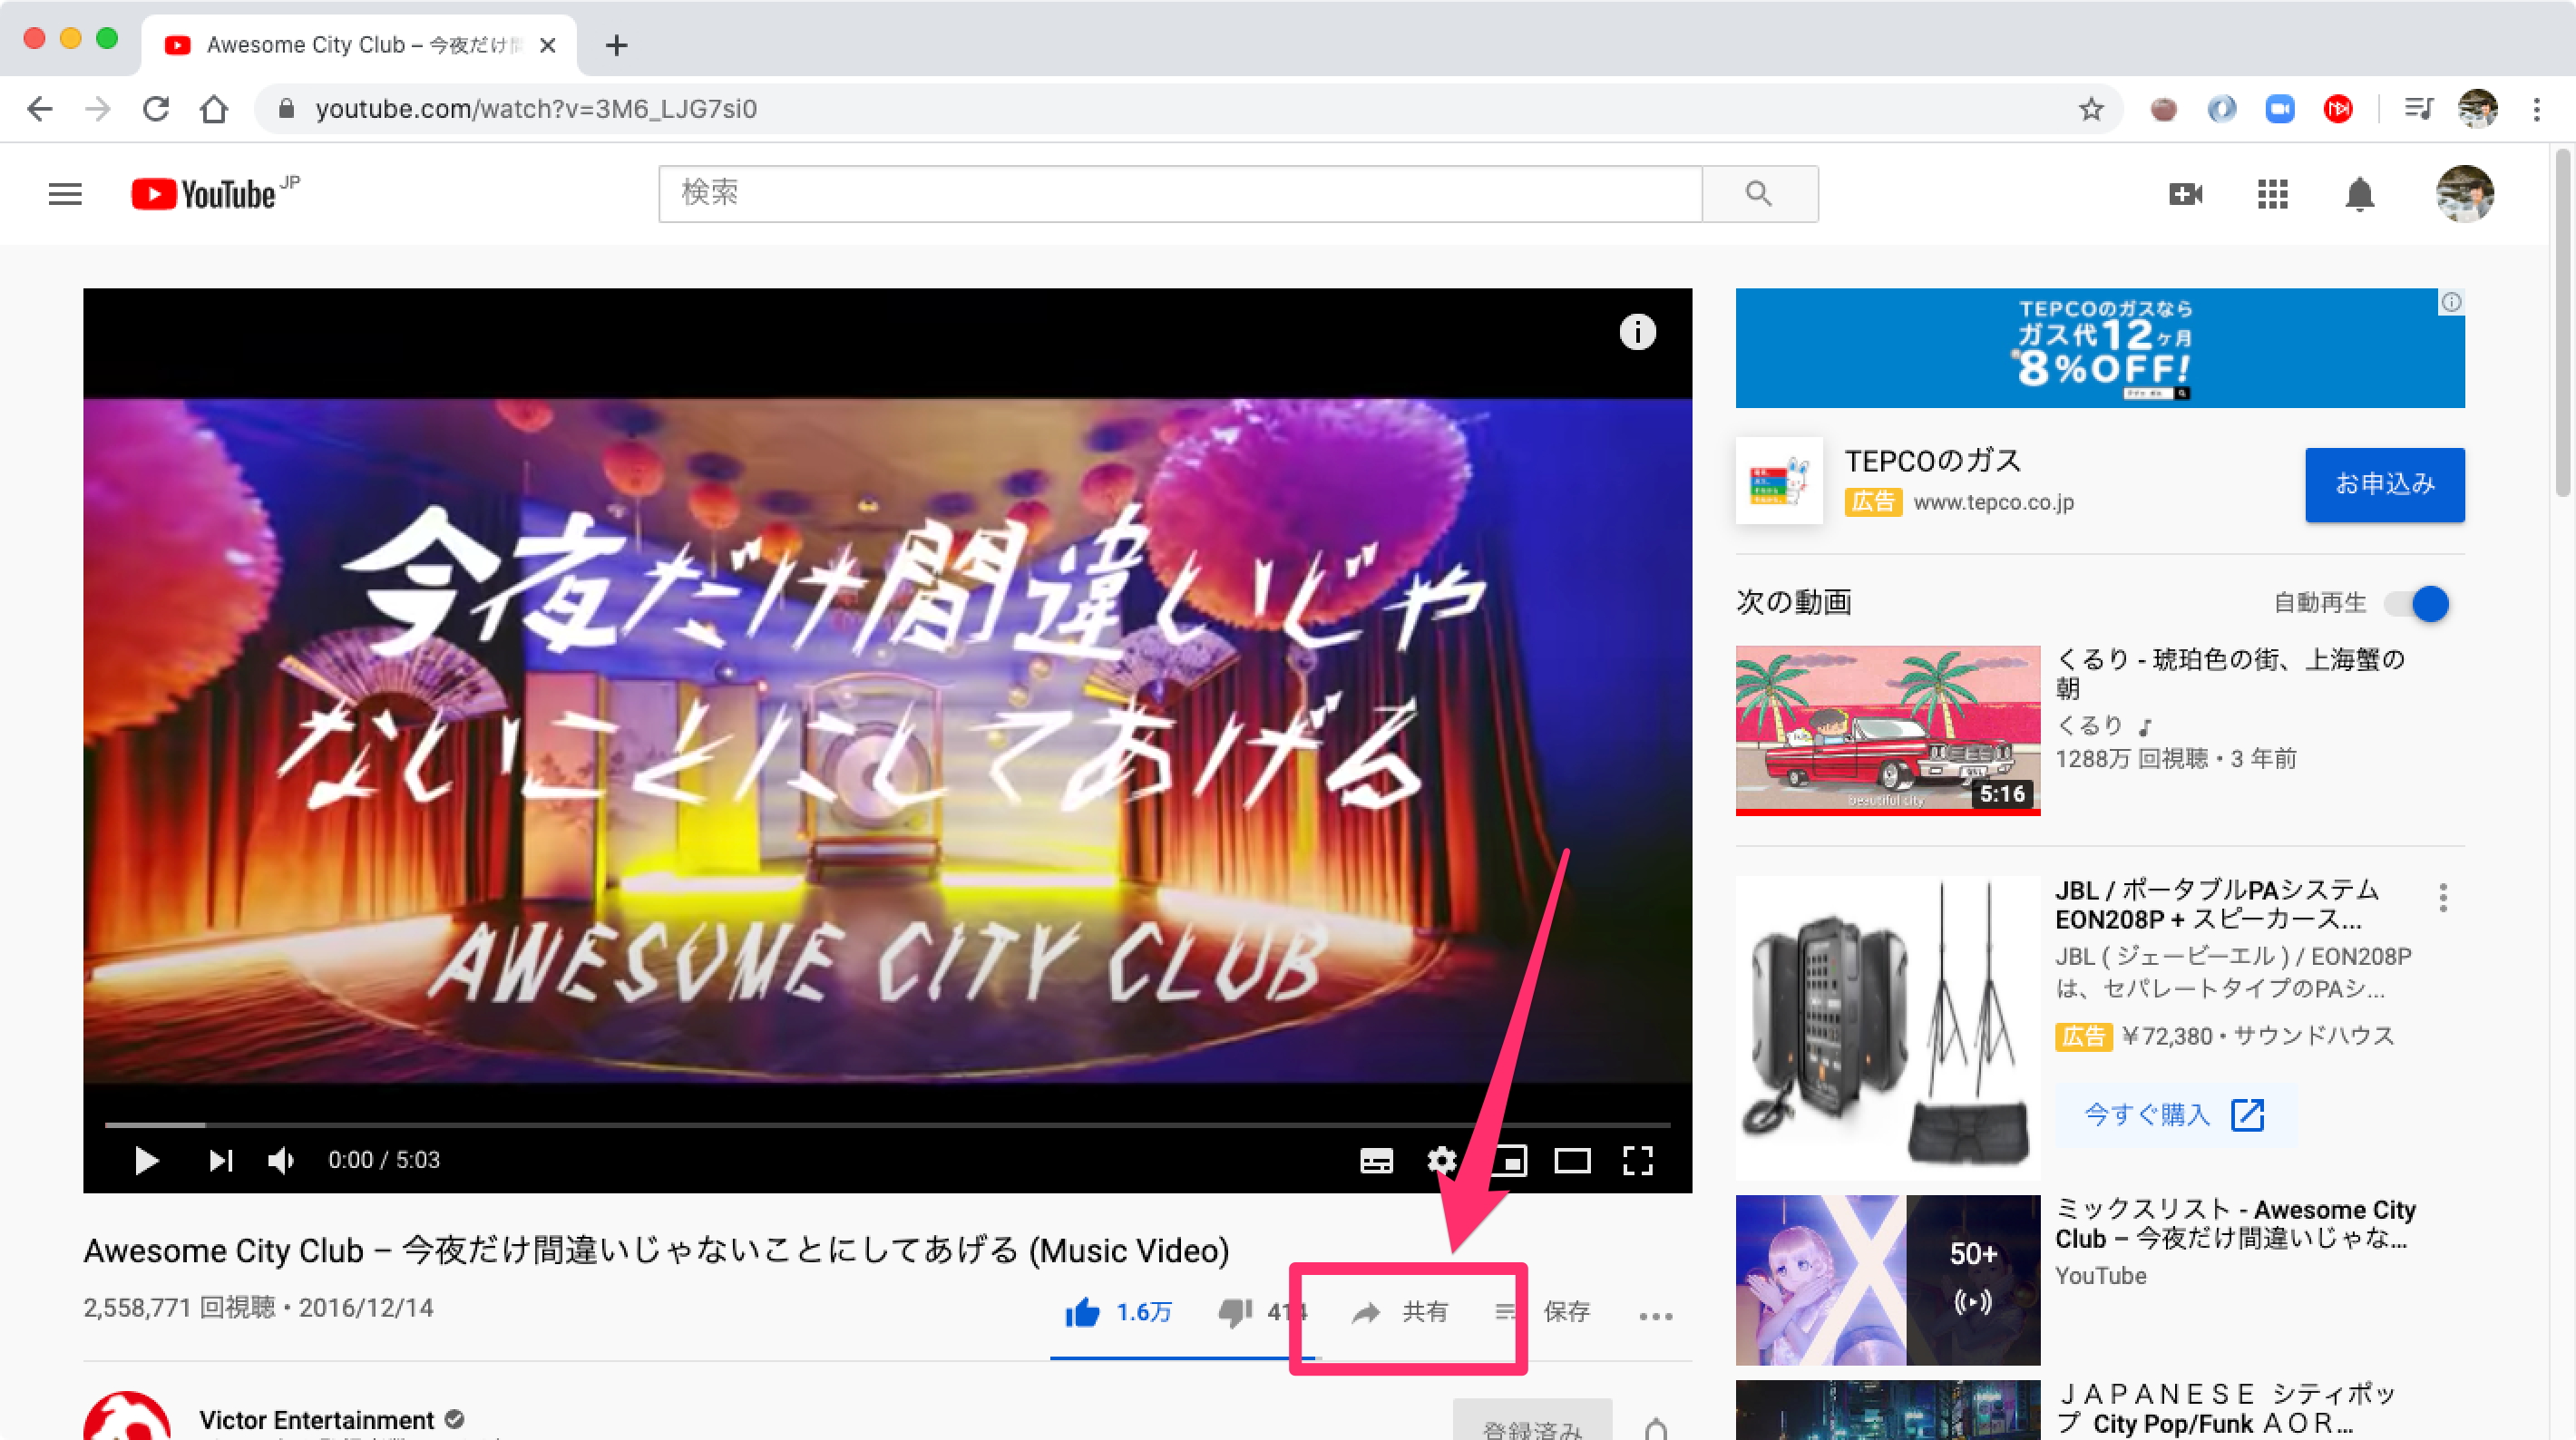 Awesome_City_Club_–_今夜だけ間違いじゃないことにしてあげる__Music_Video__-_YouTube.png